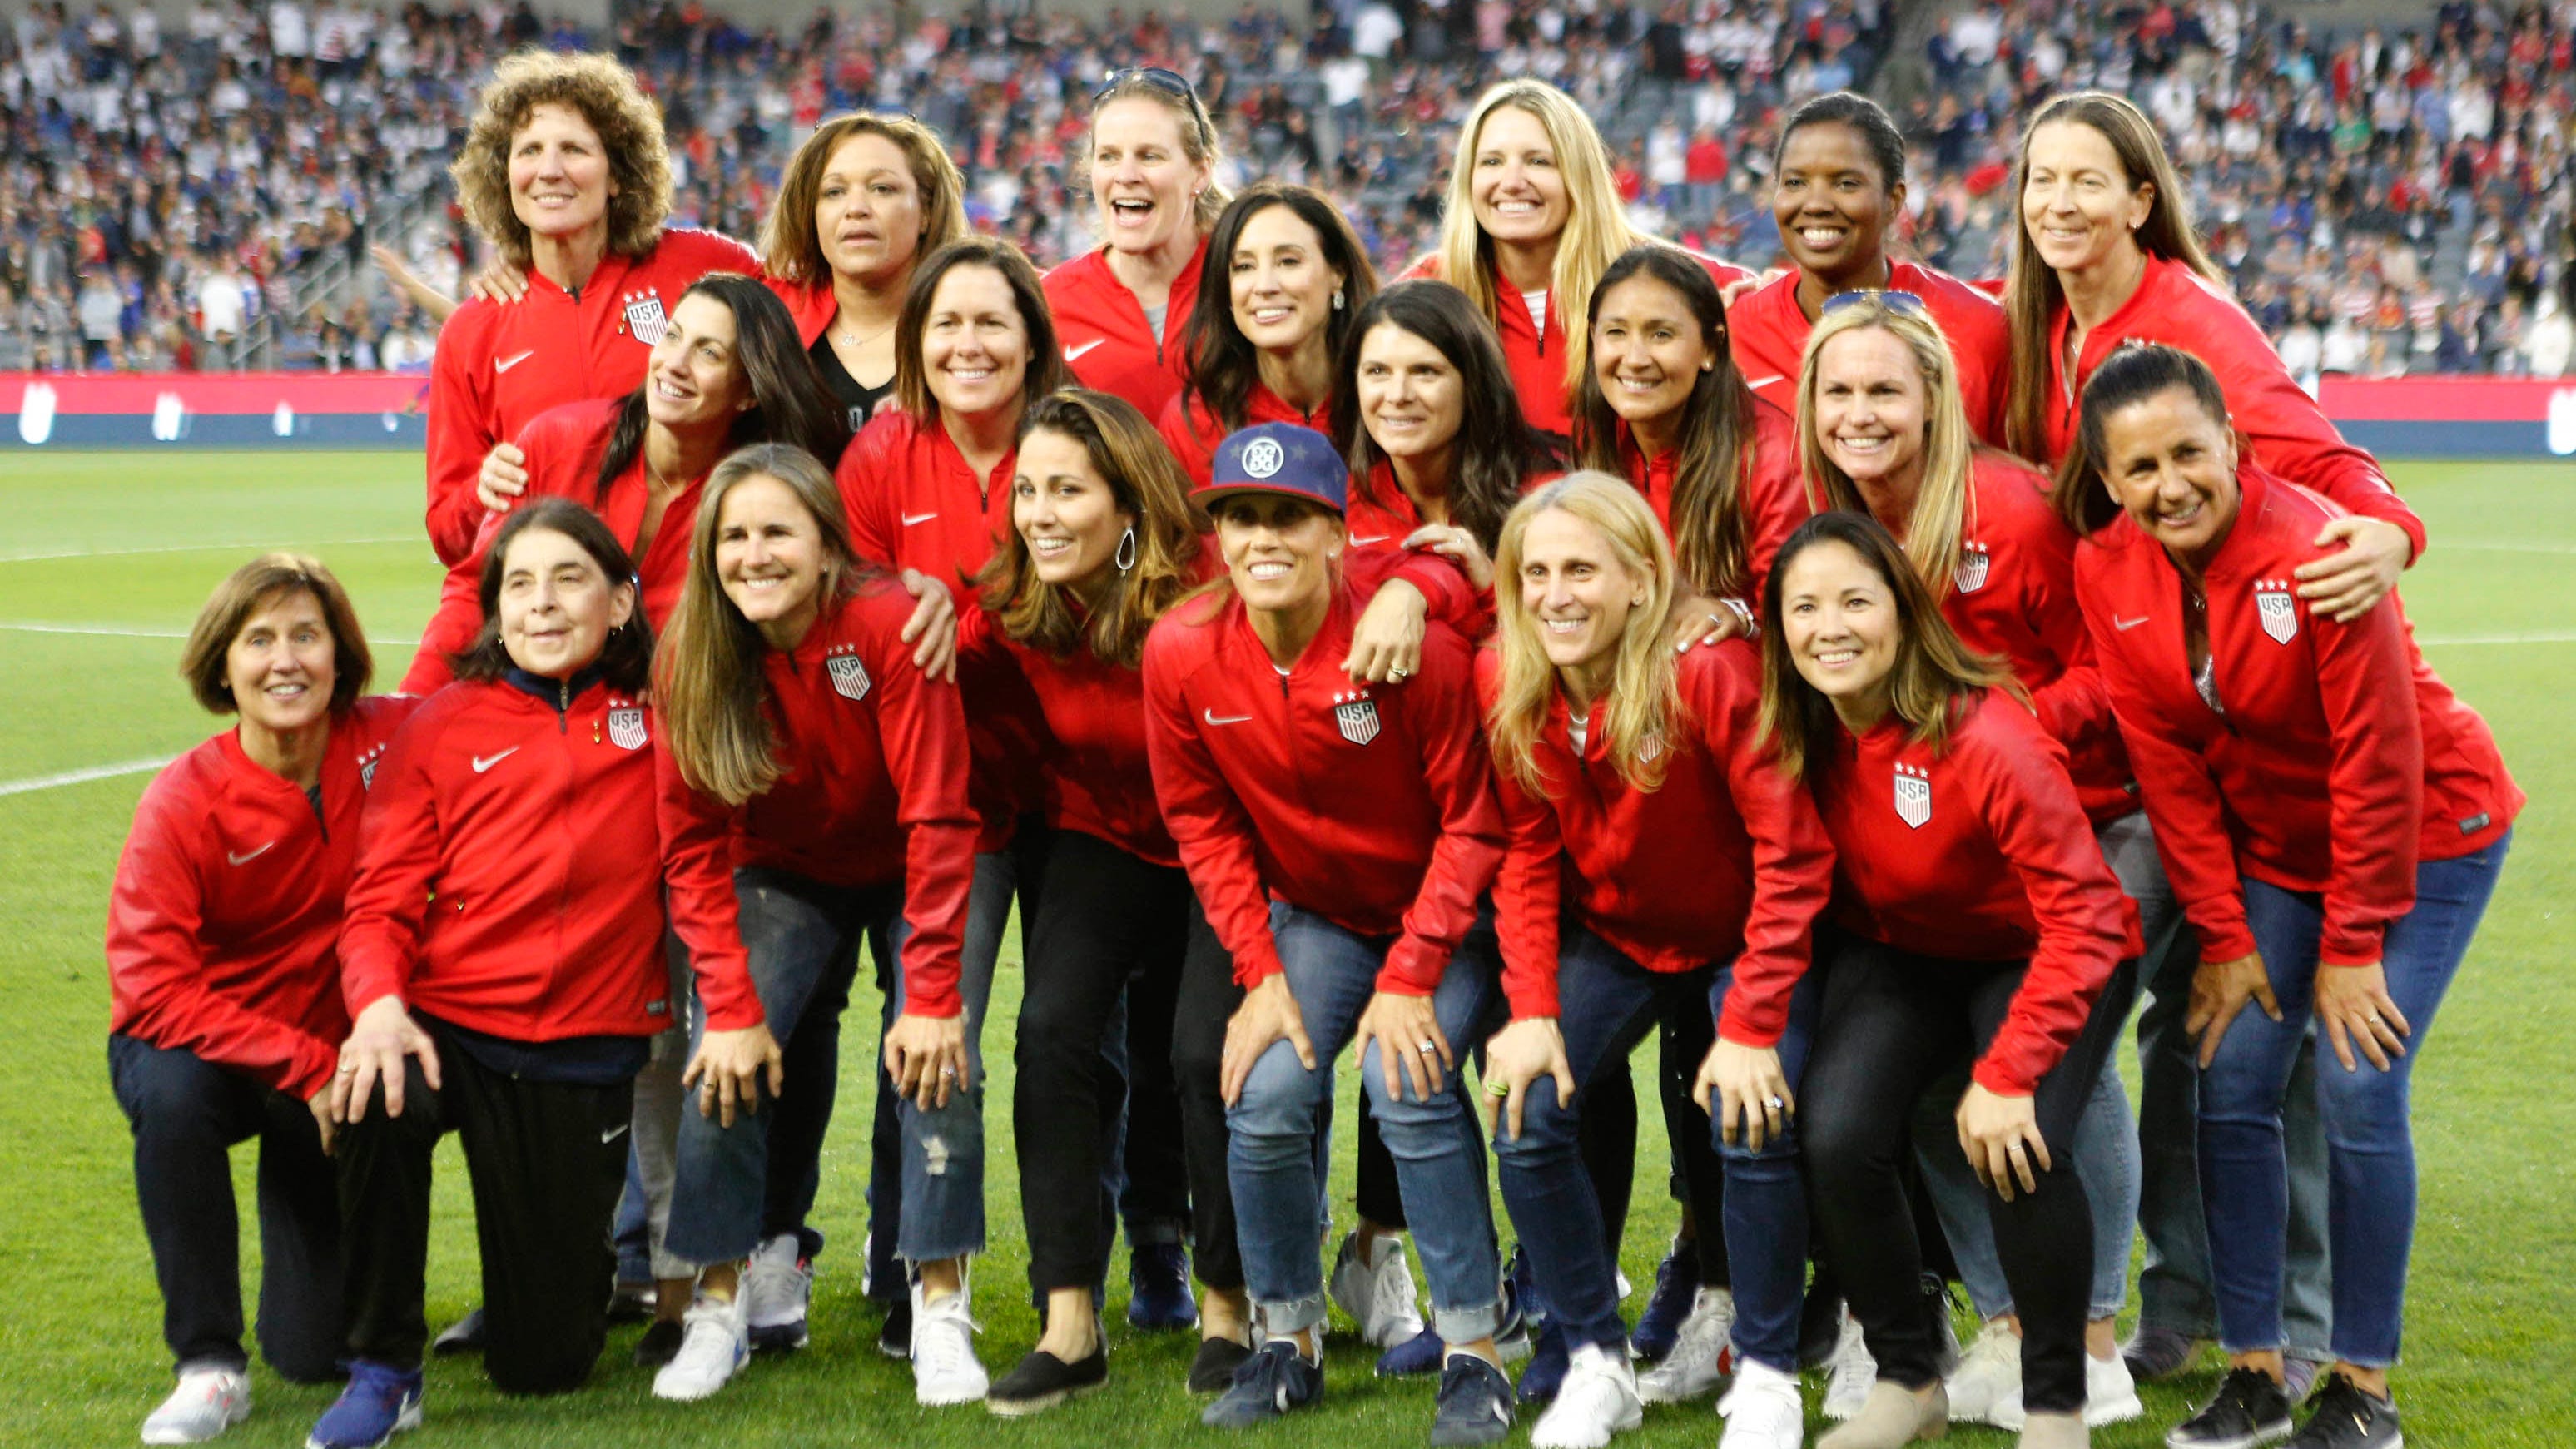 2019 World Cup US women's soccer team changed the game 20 years ago